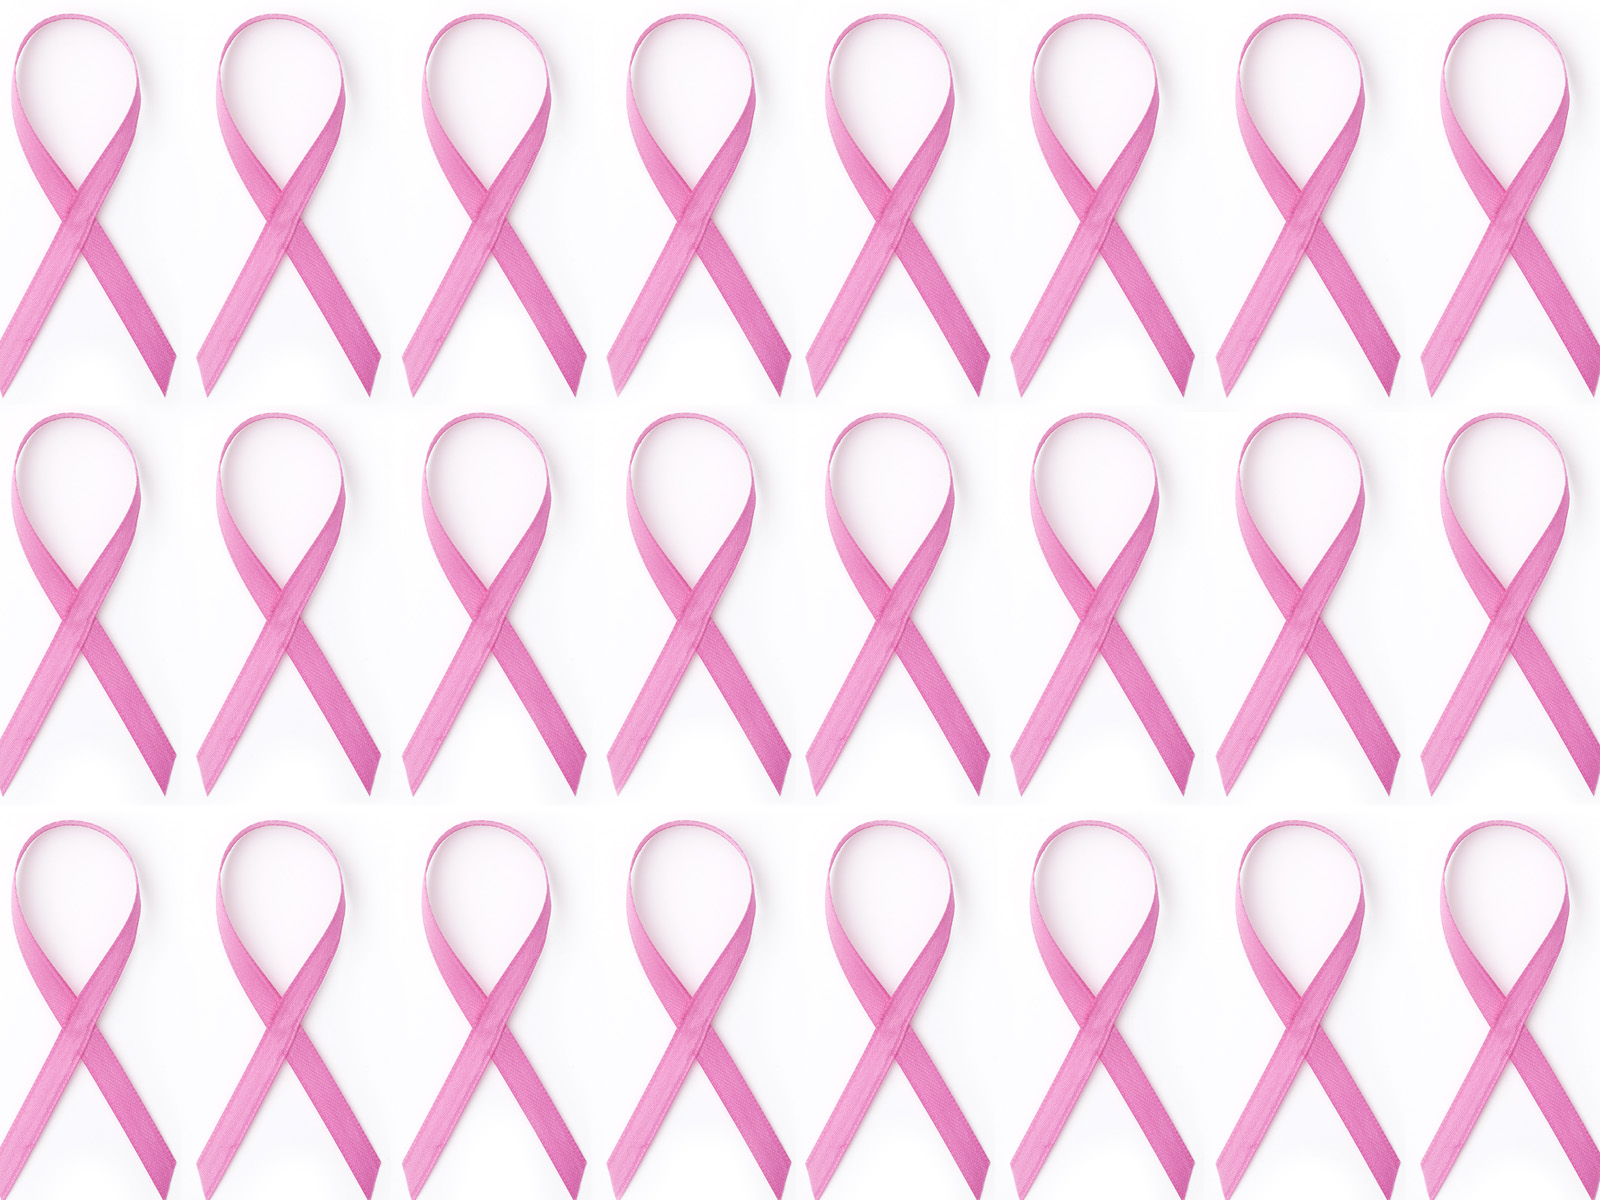 Meaning Behind the Pink Ribbons of Breast Cancer Awareness.